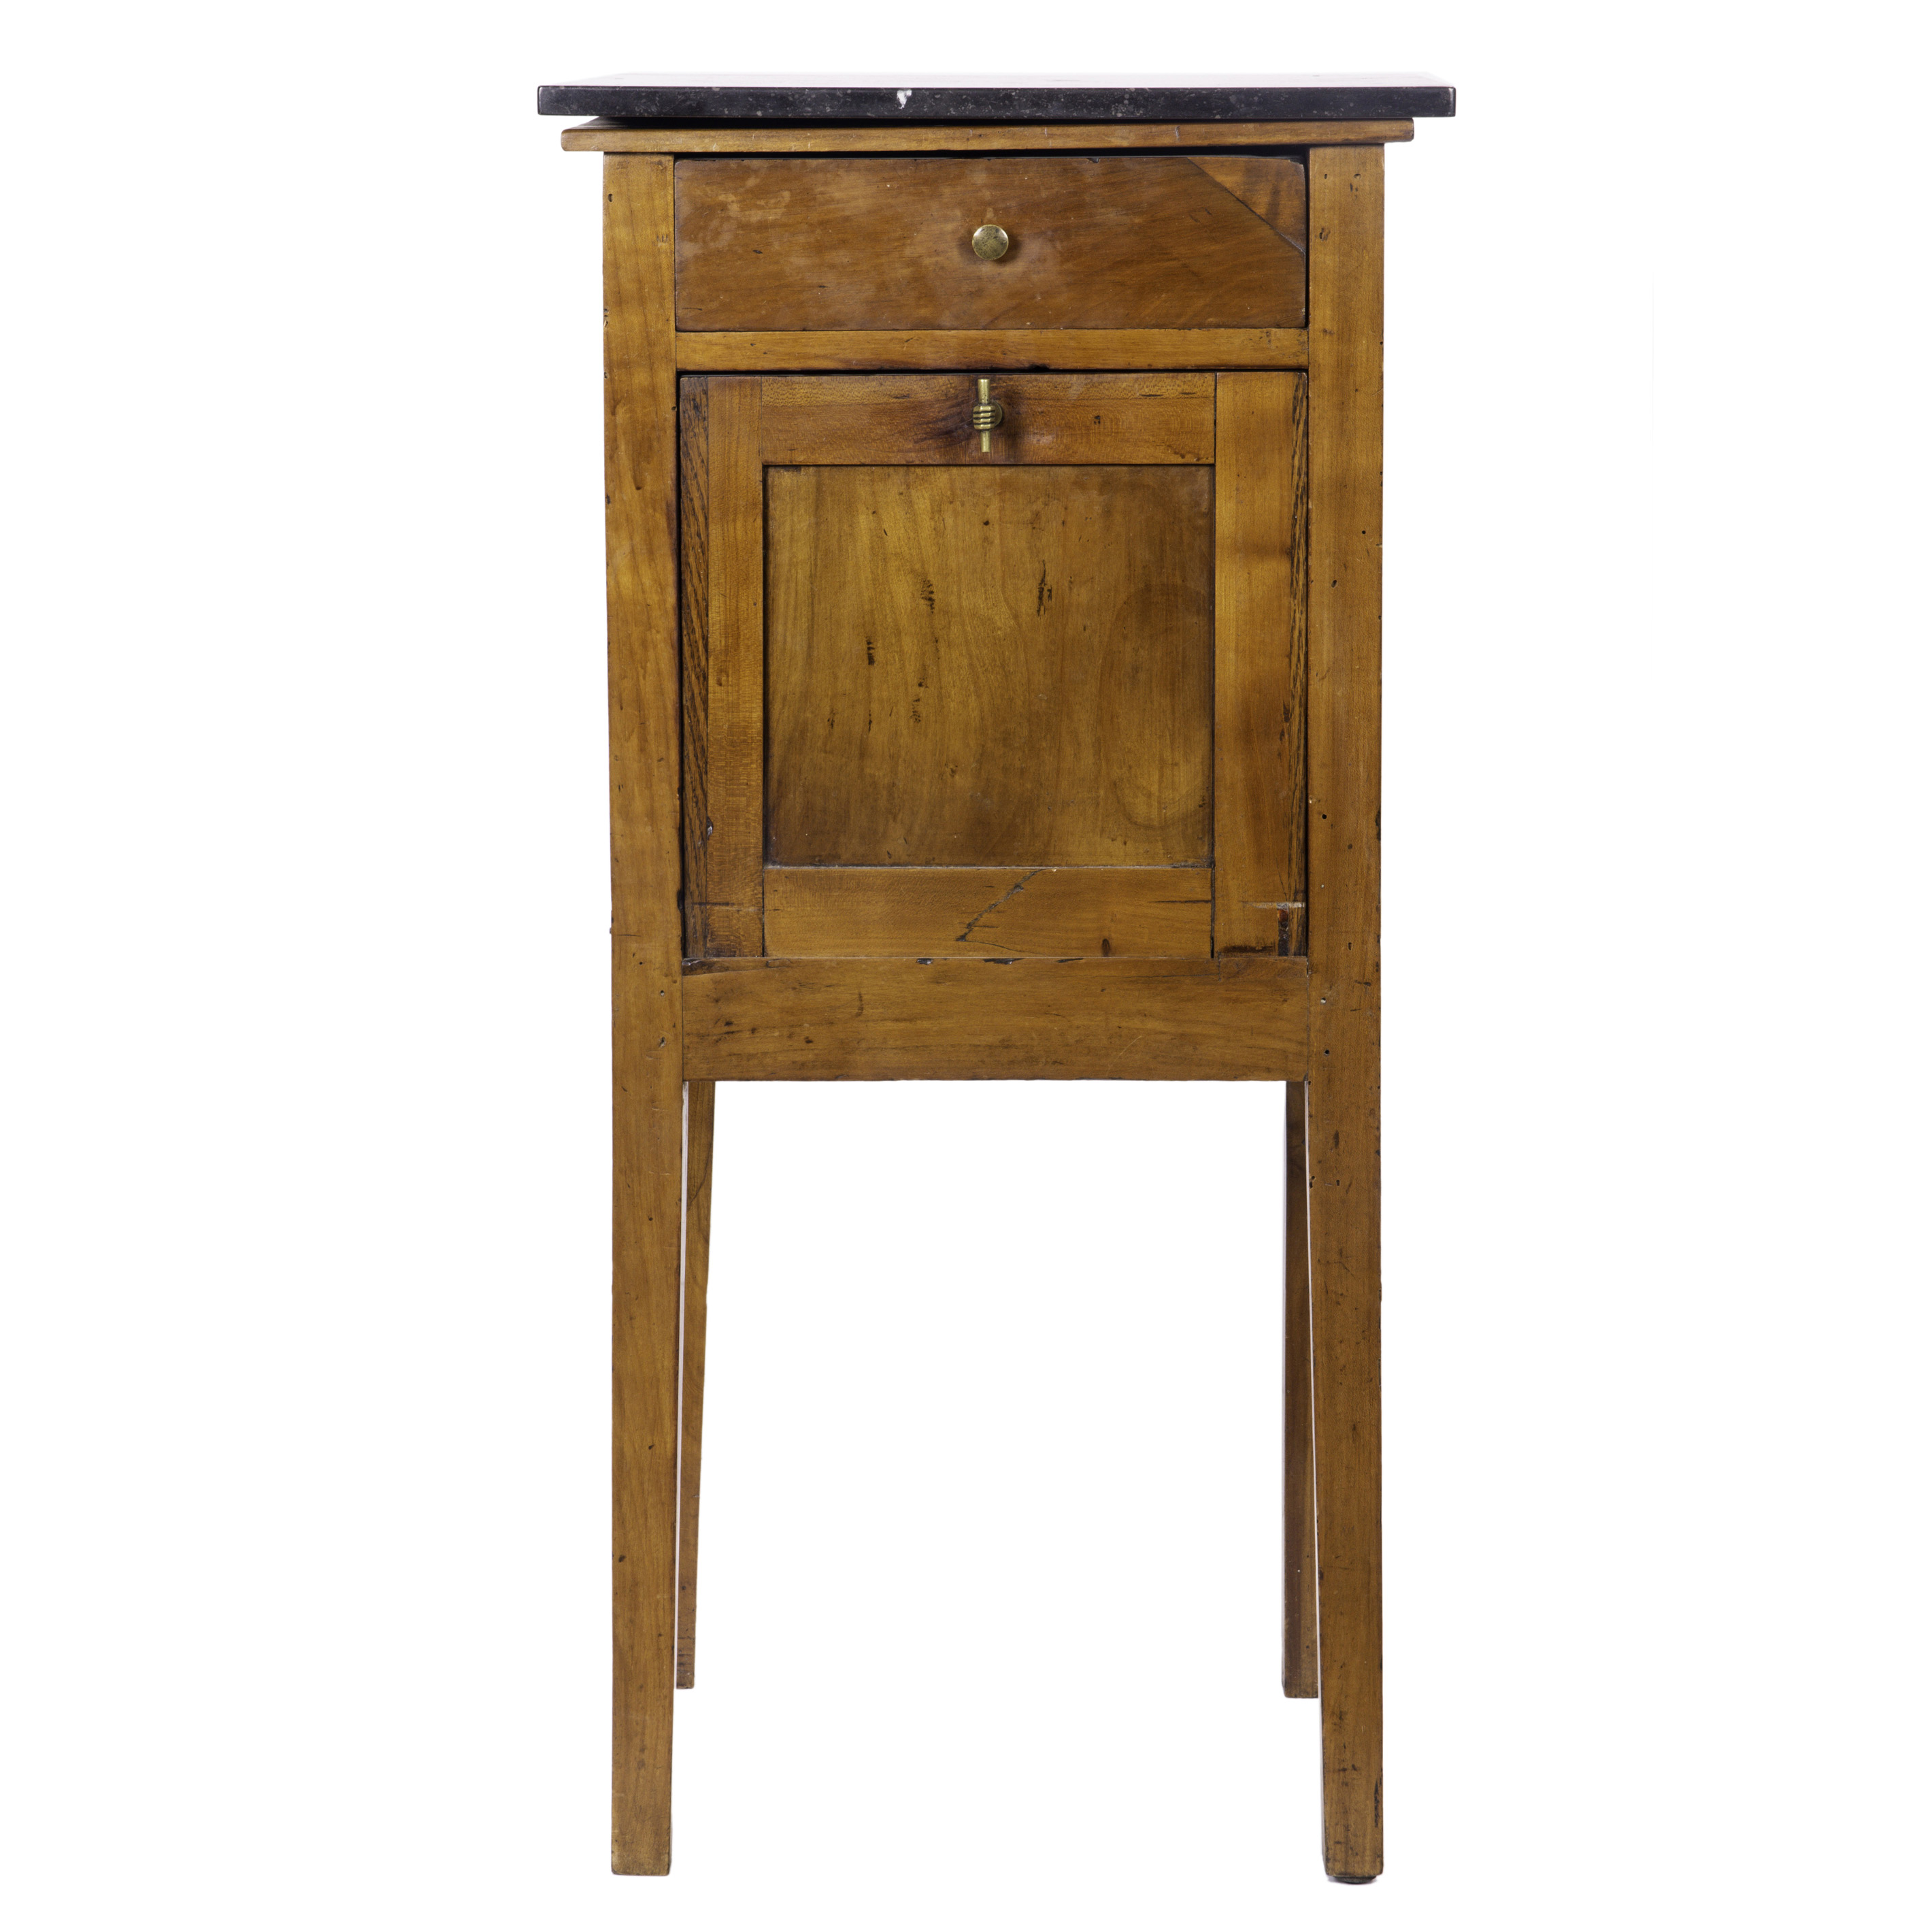 EDWARDIAN MARBLE TOP BEDSIDE TABLE 3a429a